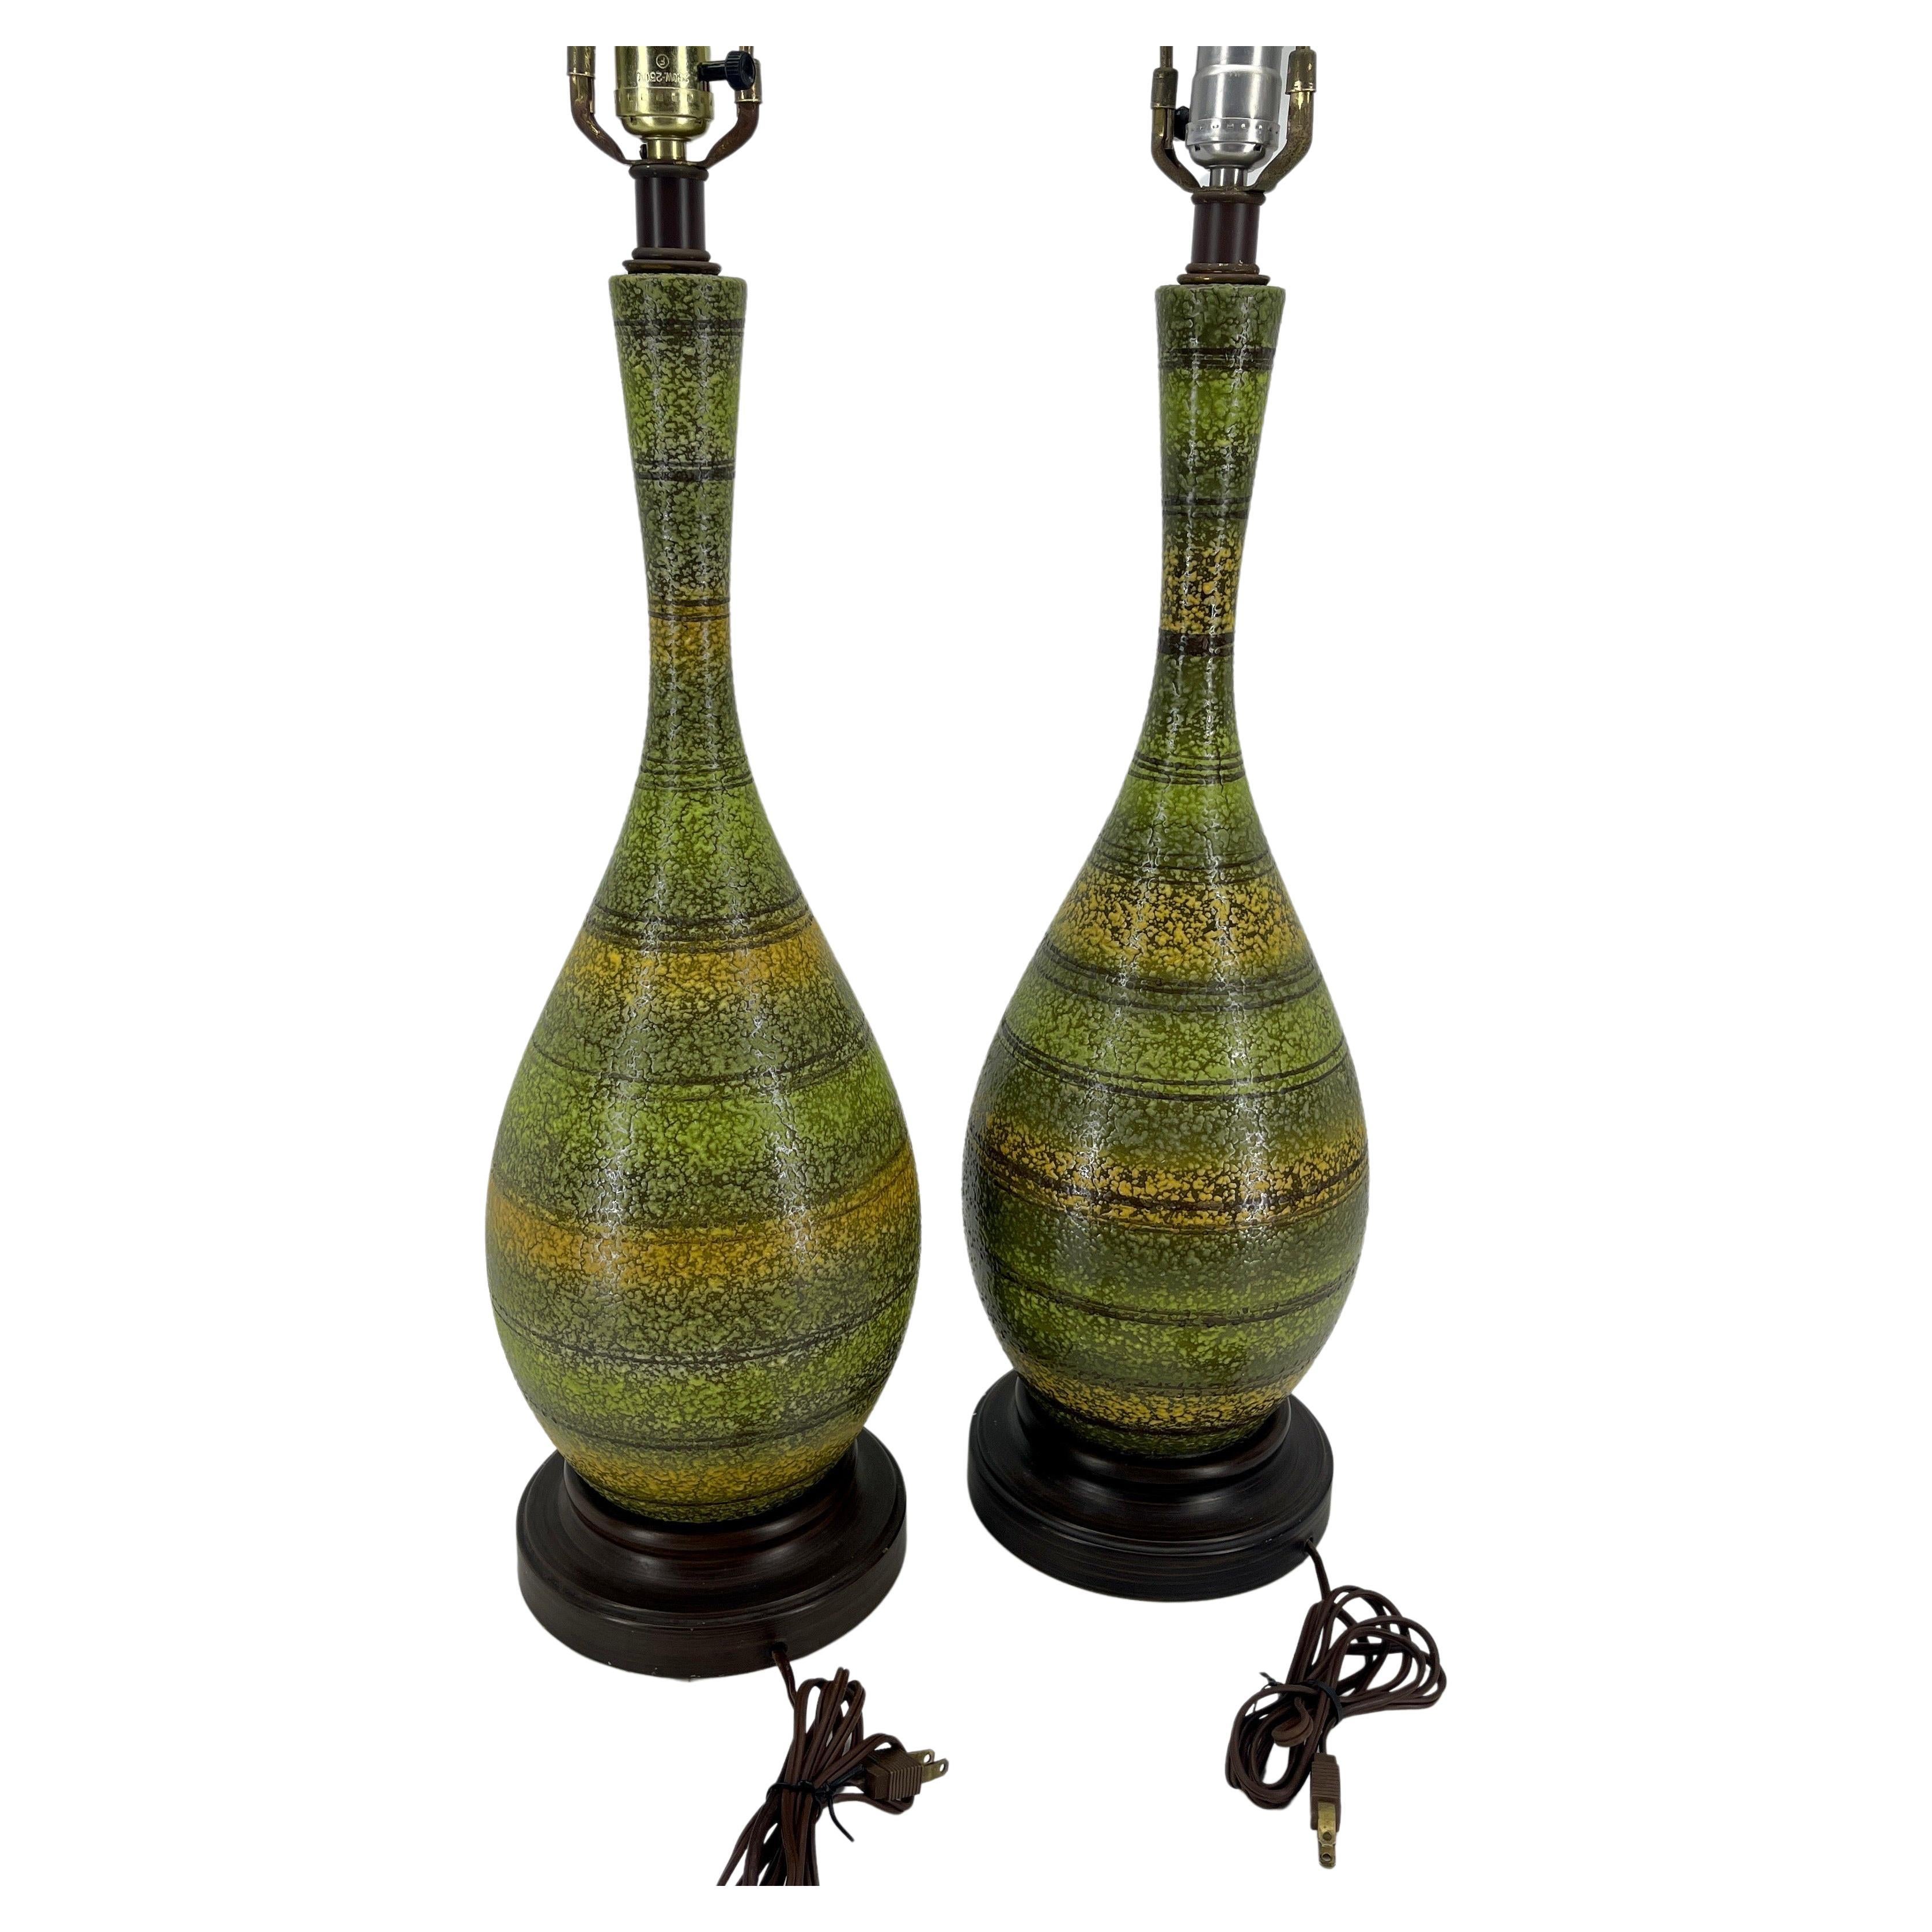 Hand-Crafted Green Pair of Mid-Century Striped Ceramic Lamps, circa 1960's For Sale